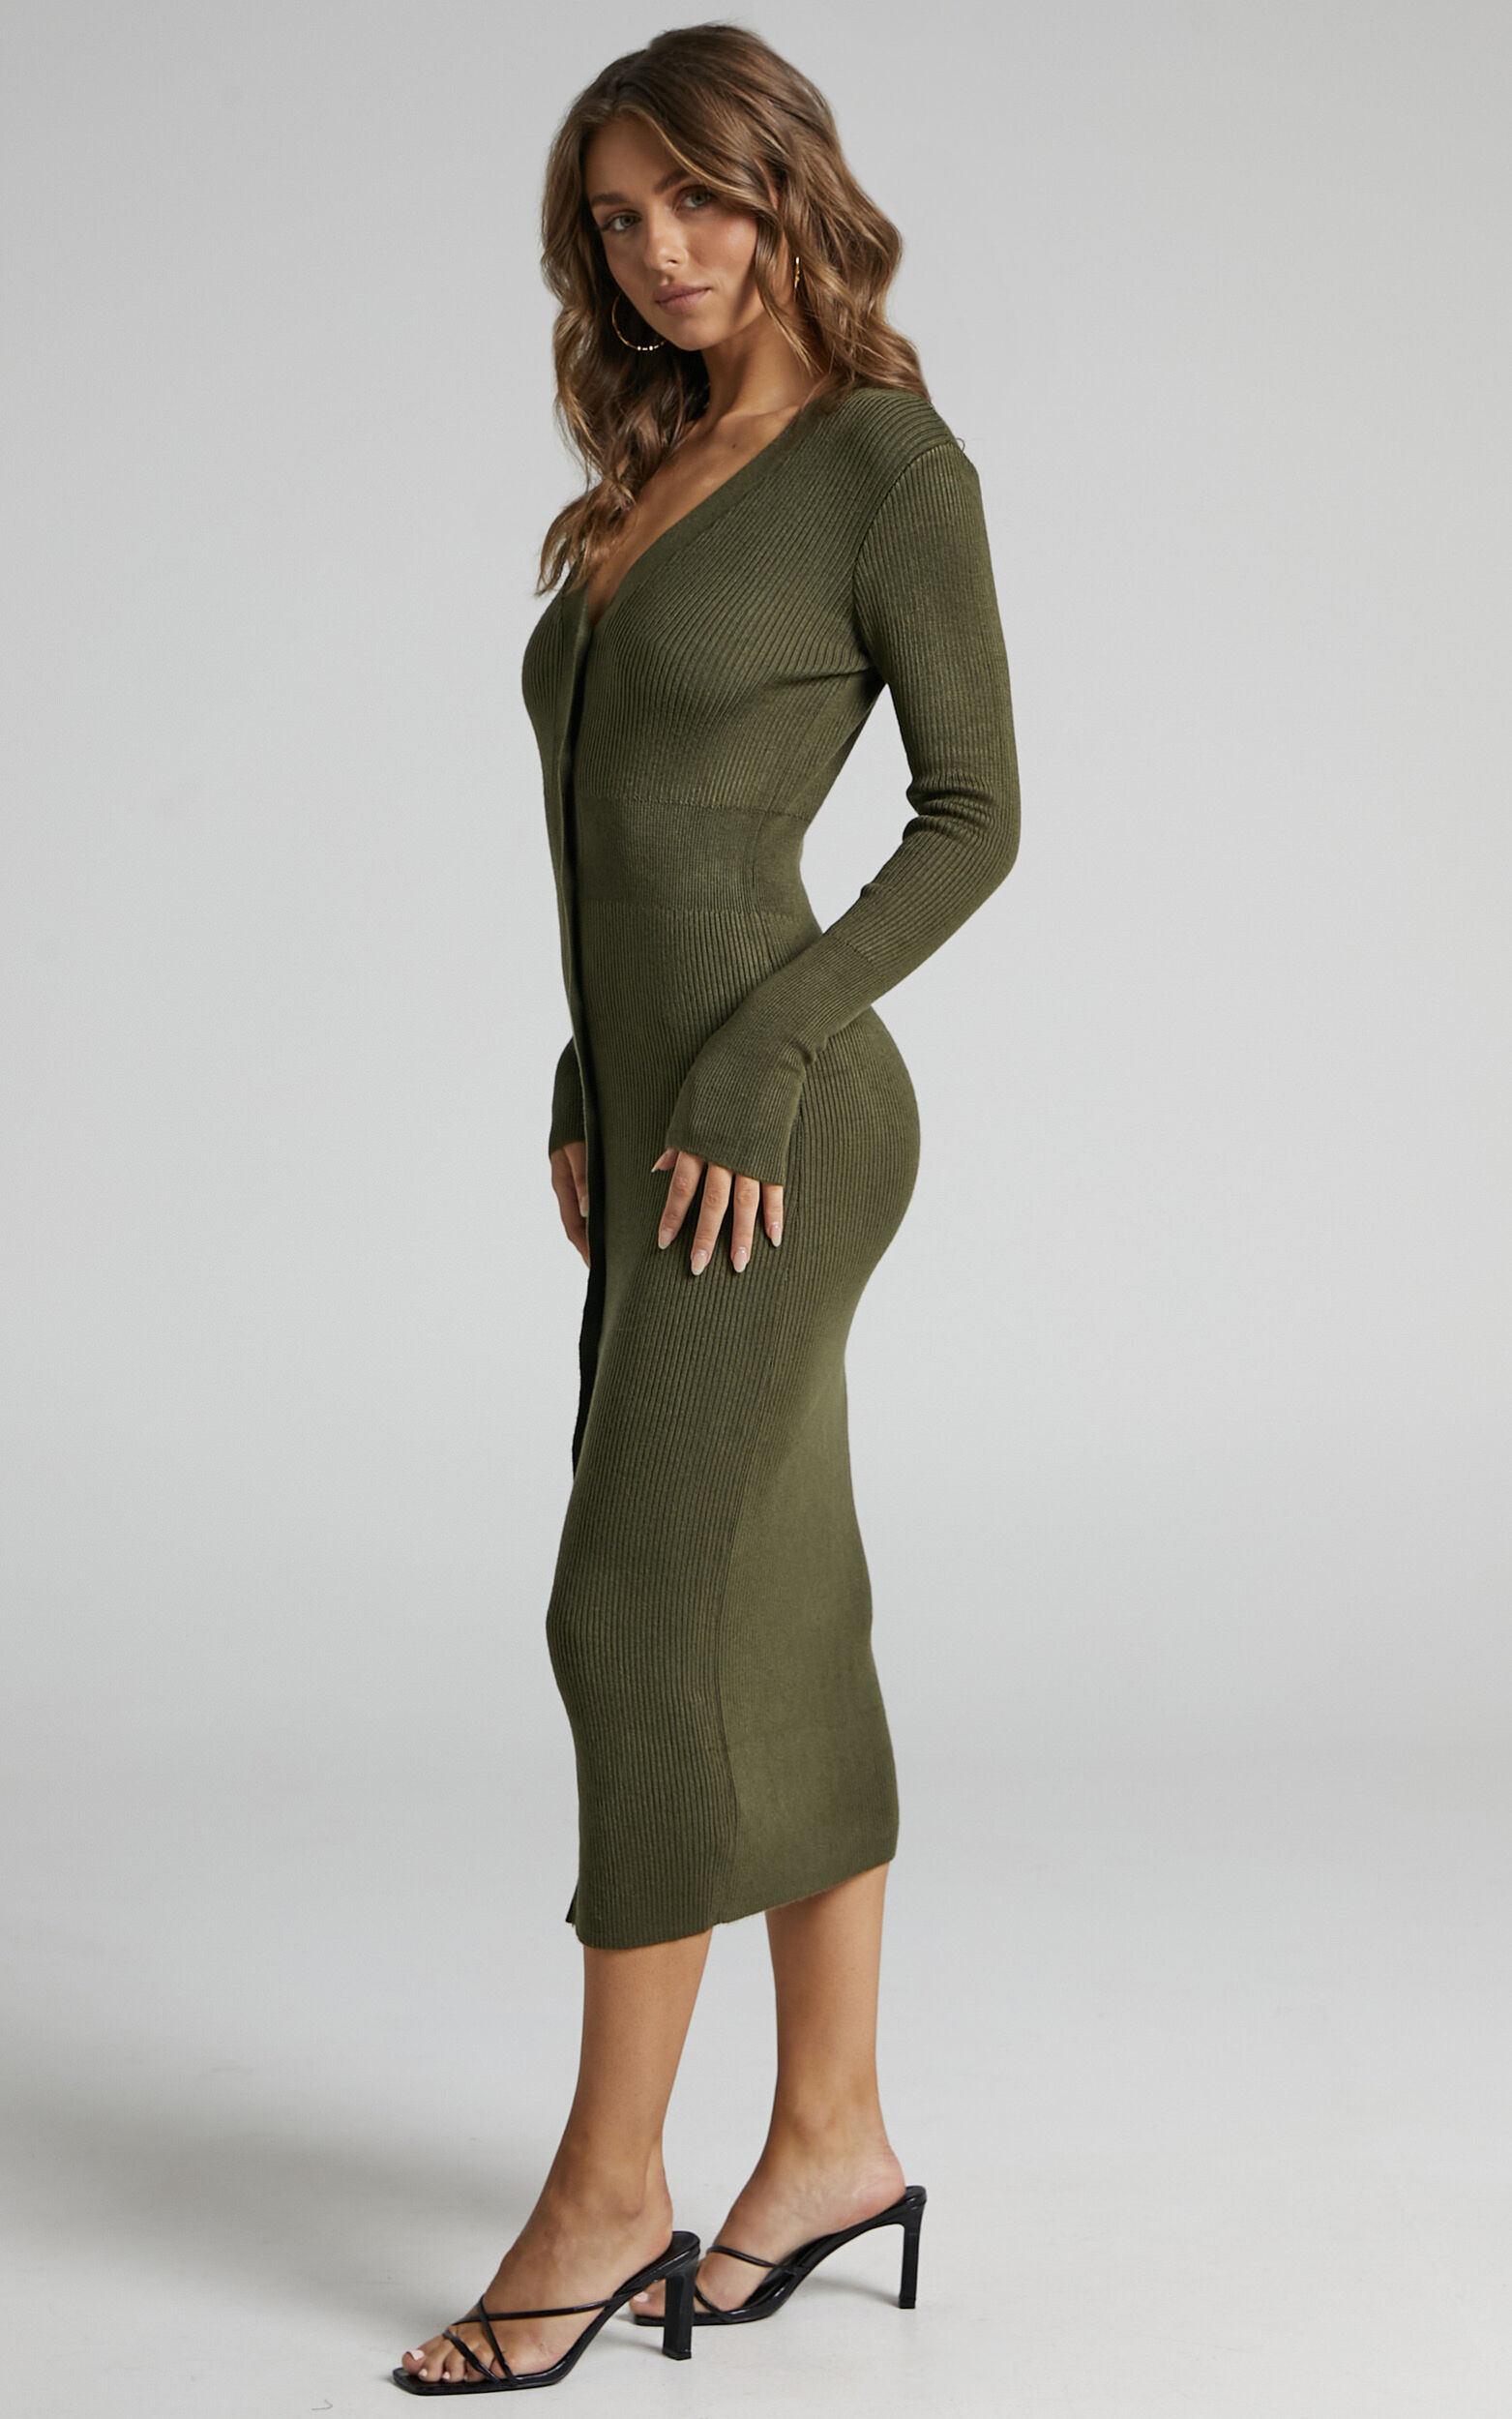 SUBOO - Leah Knit Square Neck Dress (Olive)